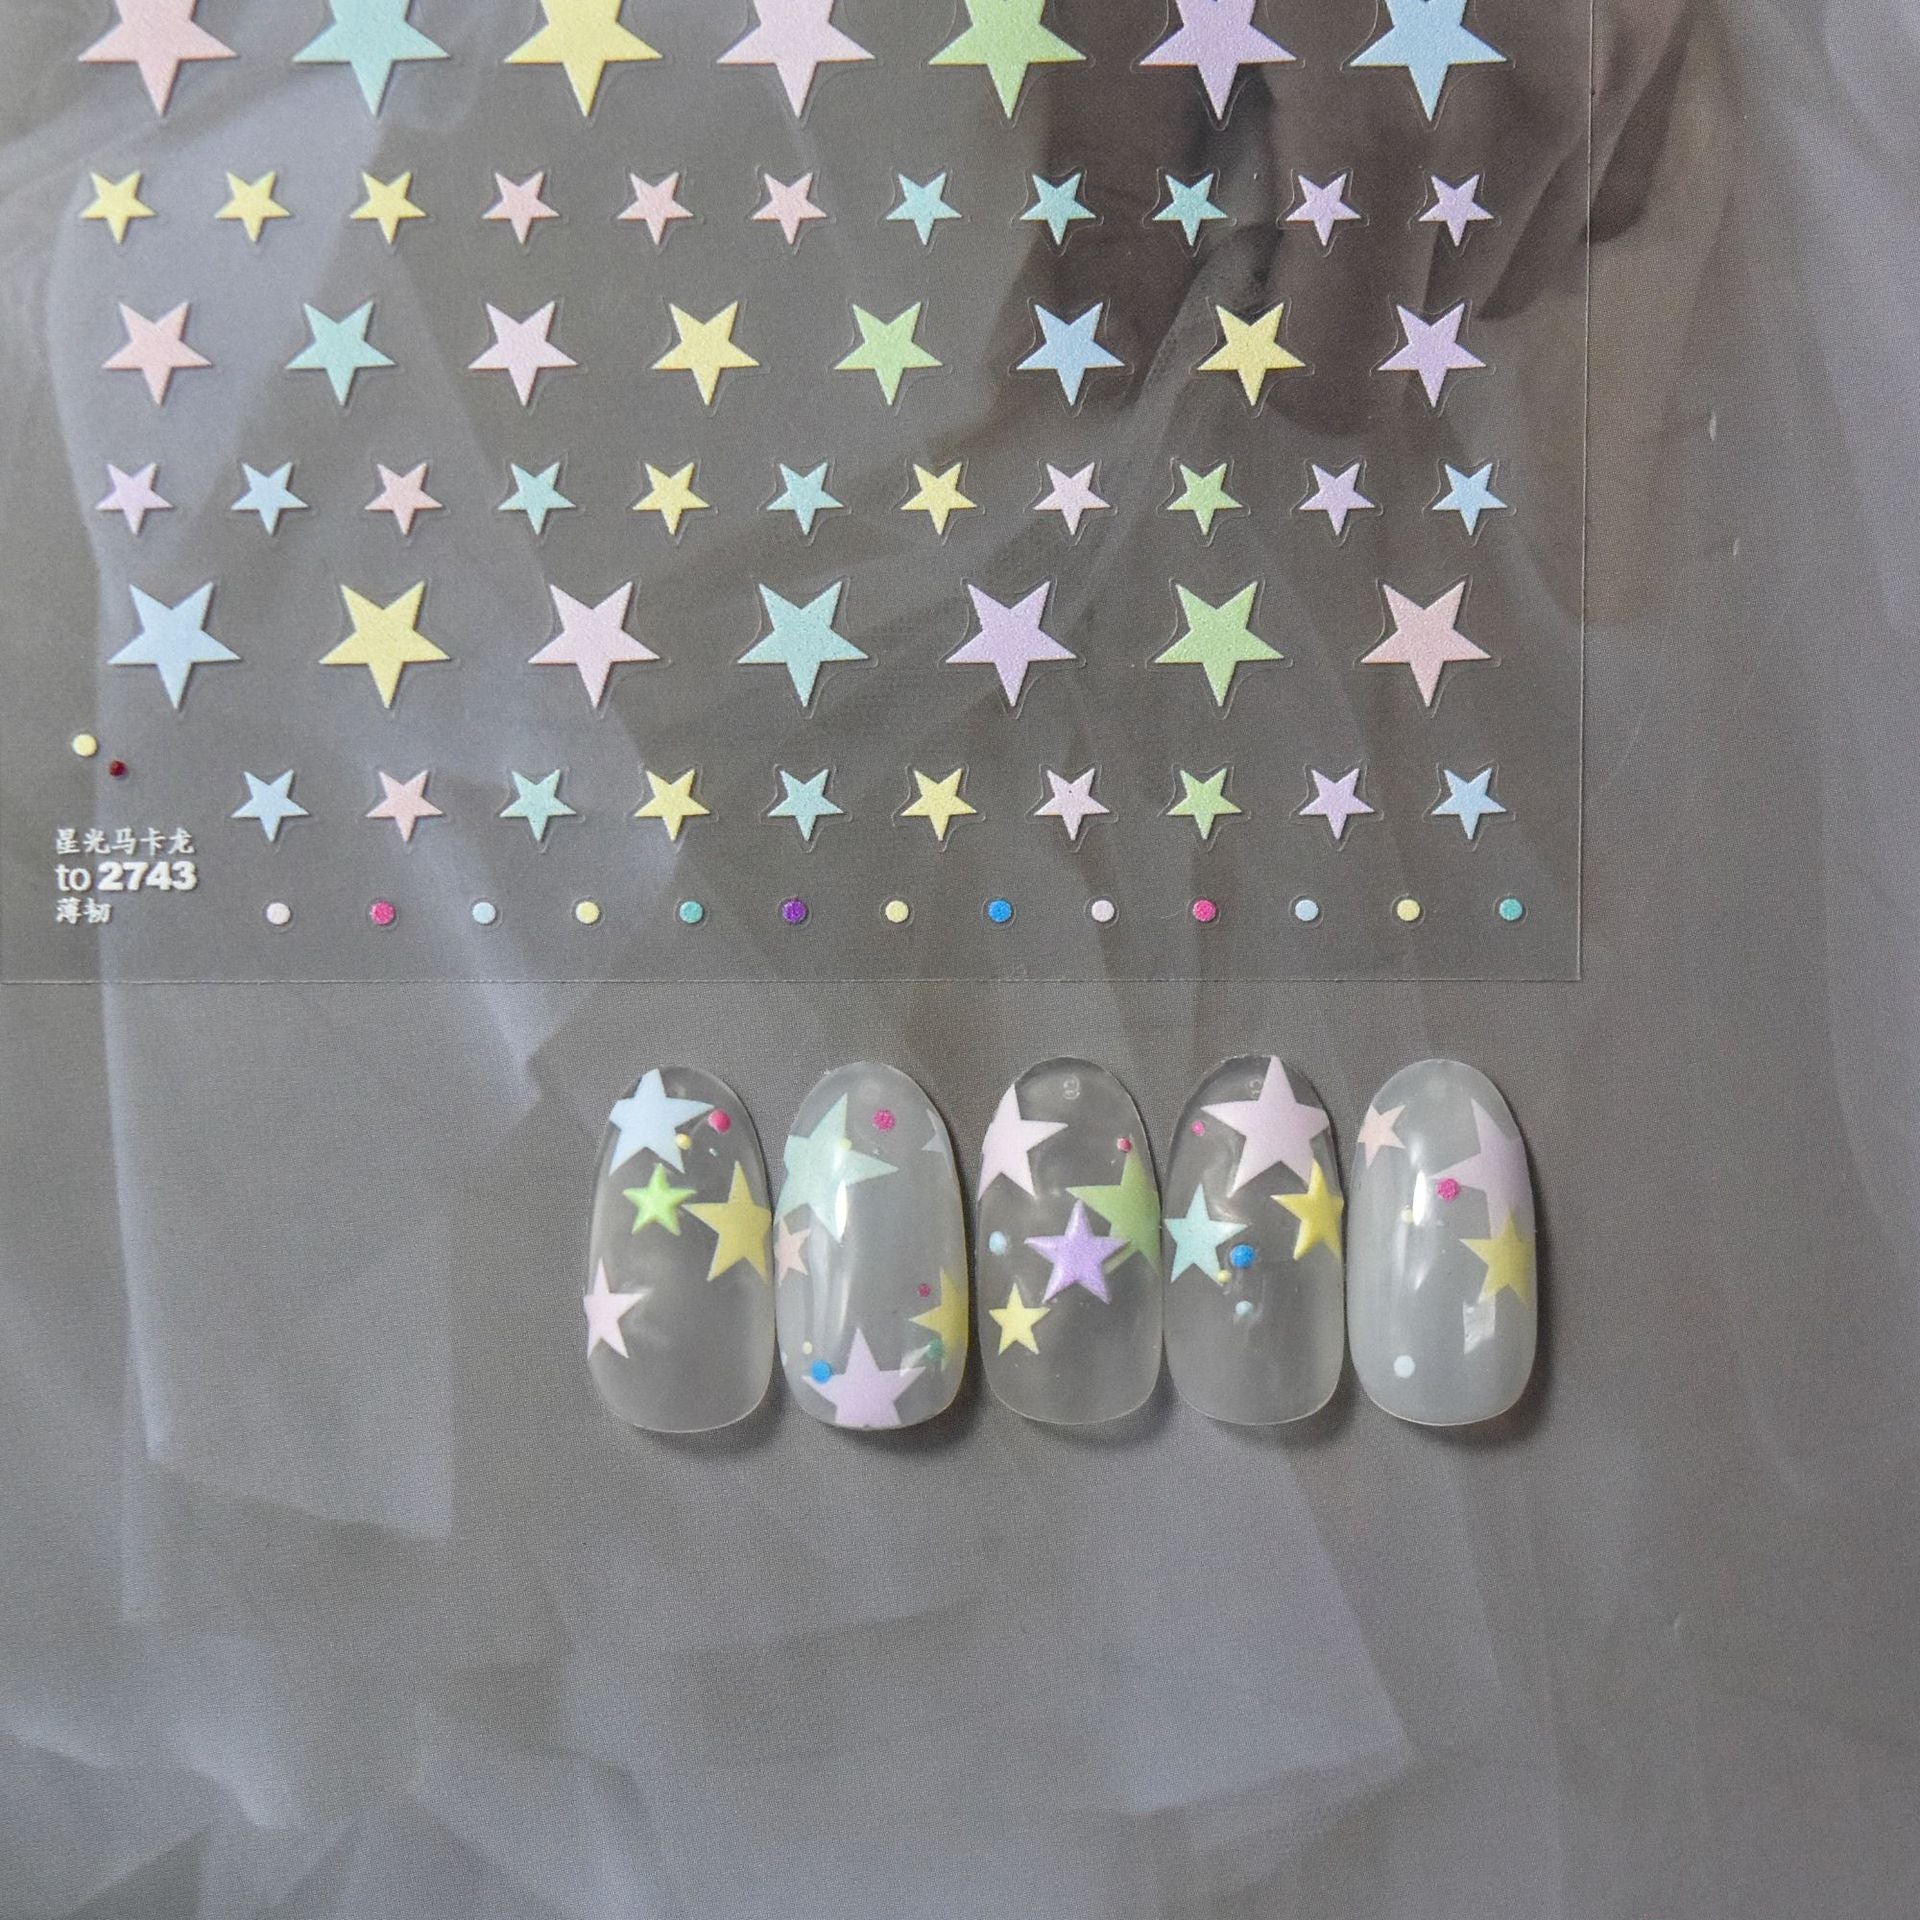 NailMAD Colorful Star Nail Art Stickers Adhesive Sticker Decals Self-Adhesive DIY Manicure Accessories to2720